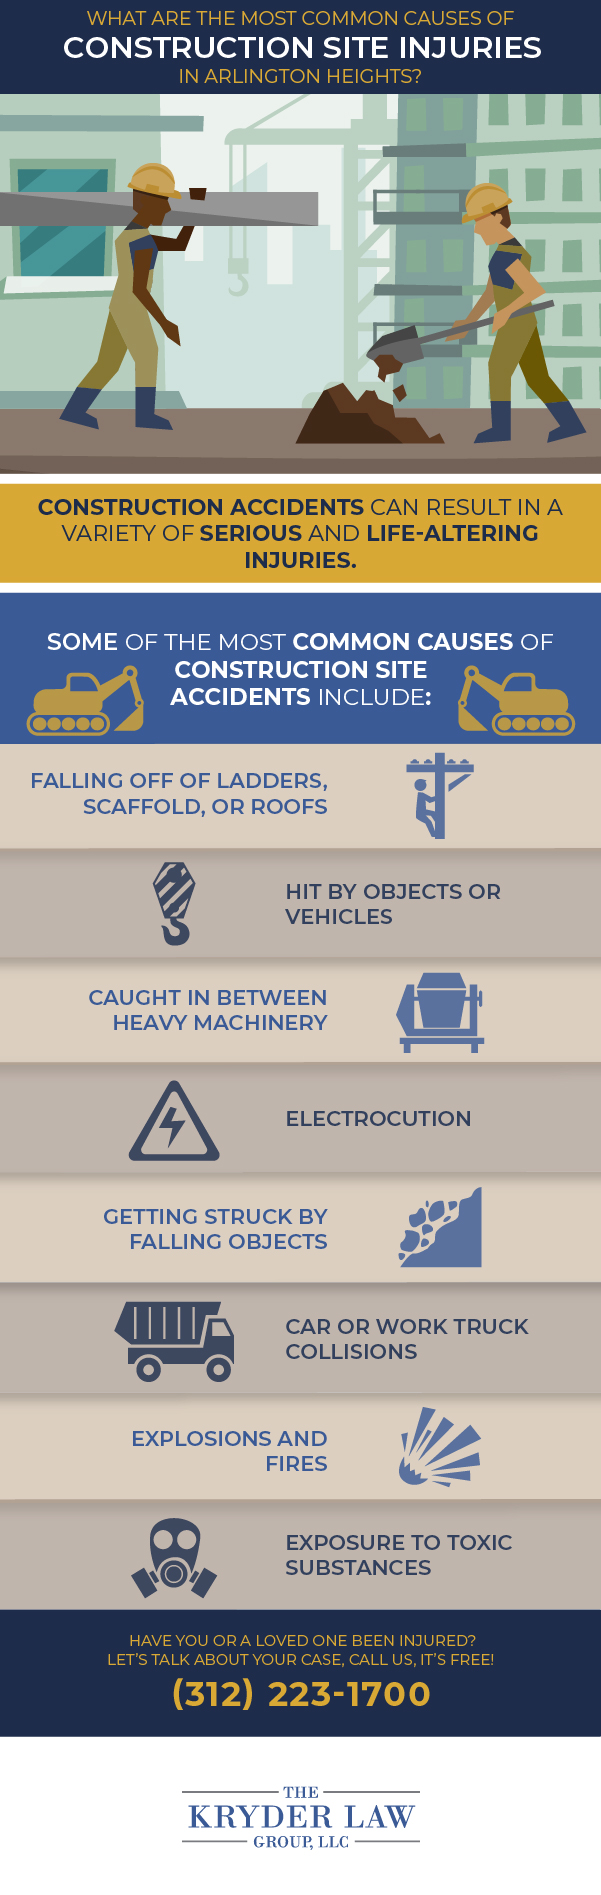 Arlington Heights Construction Accident Lawyer Infographic